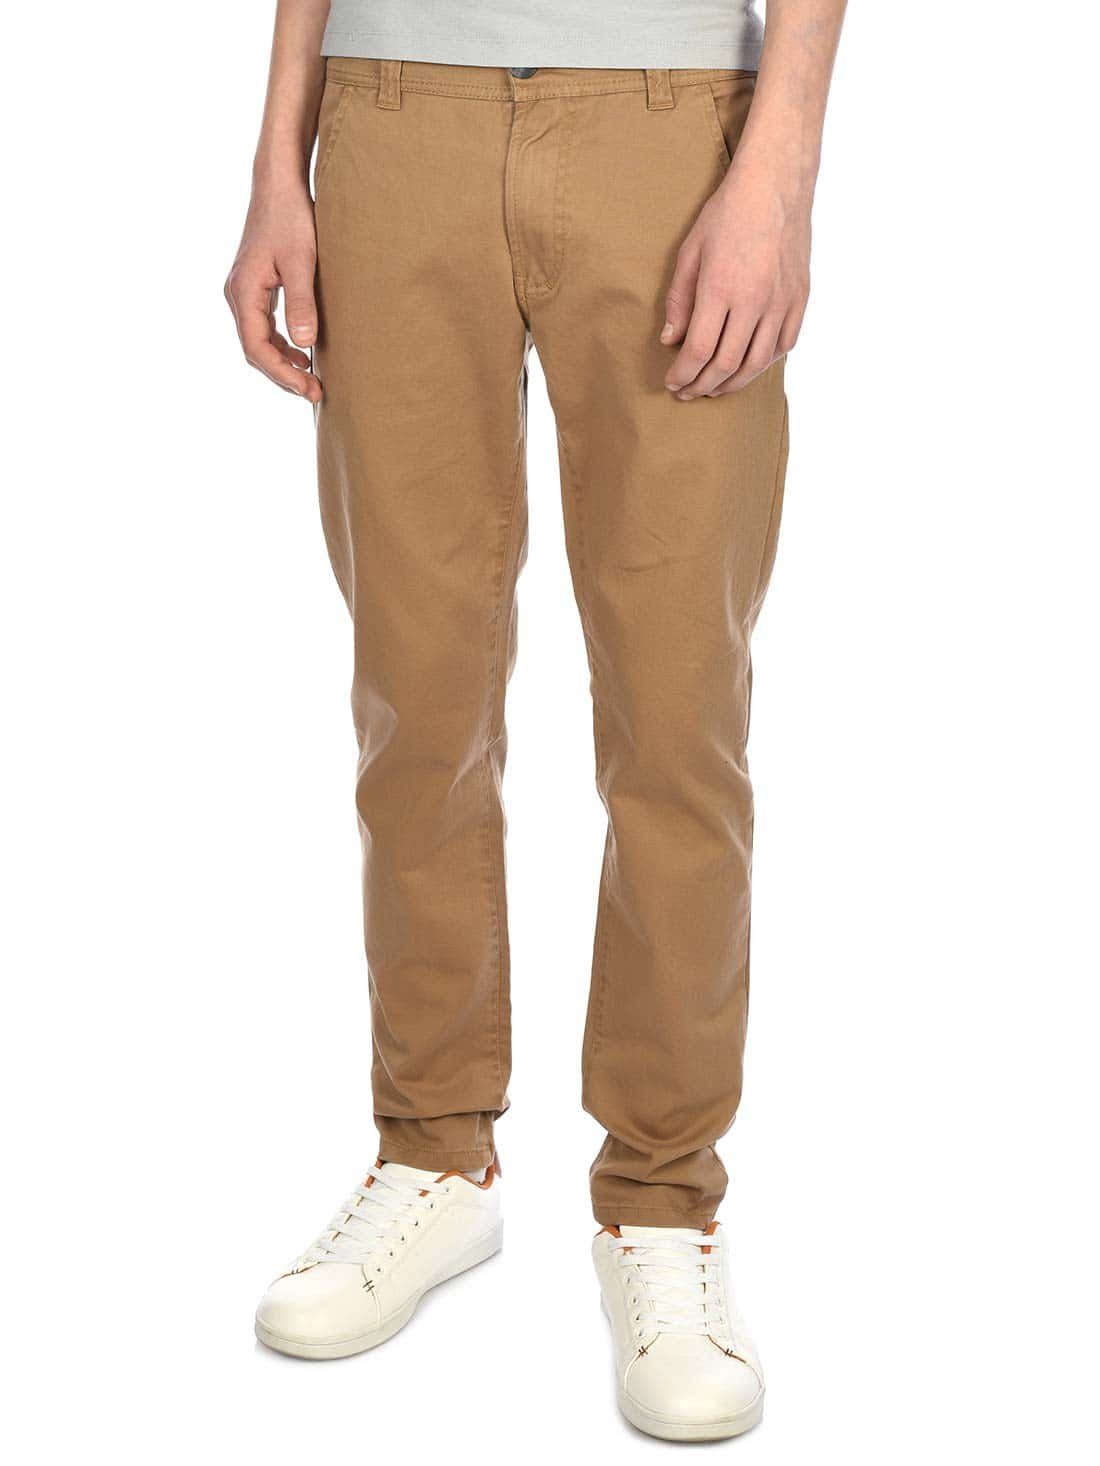 BEZLIT Chinohose Jungen Chino Hose (1-tlg) casual Beige